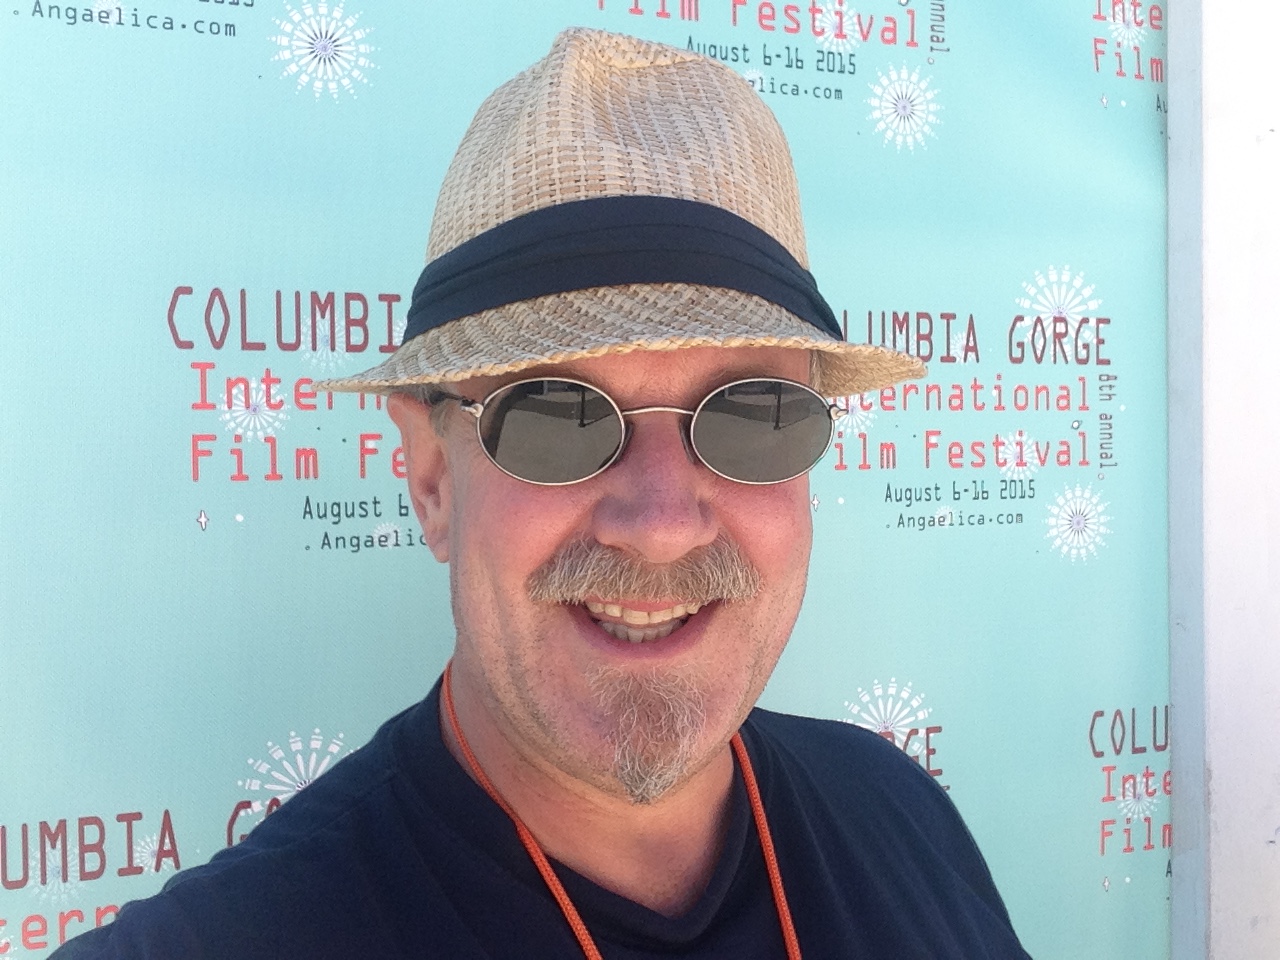 With three Official Selections in the program, director Robert David Duncan arrives at the Columbia Gorge International Film Festival for public screenings of 